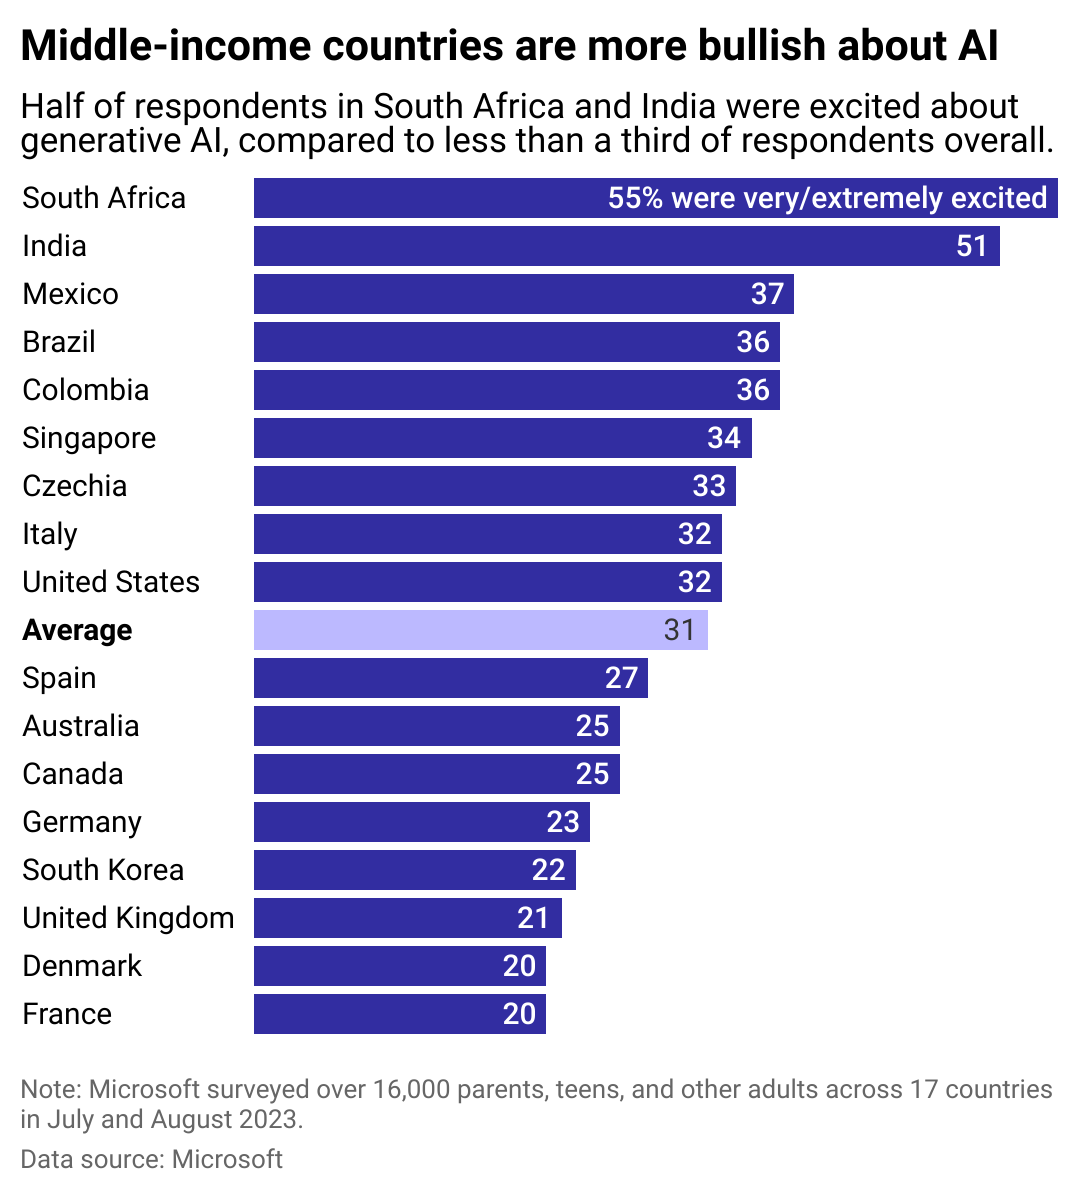 A chart showing how enthusiastic people from different countries are about AI, broken down by country. In general, people from middle-income countries were more optimistic than people from richer countries.